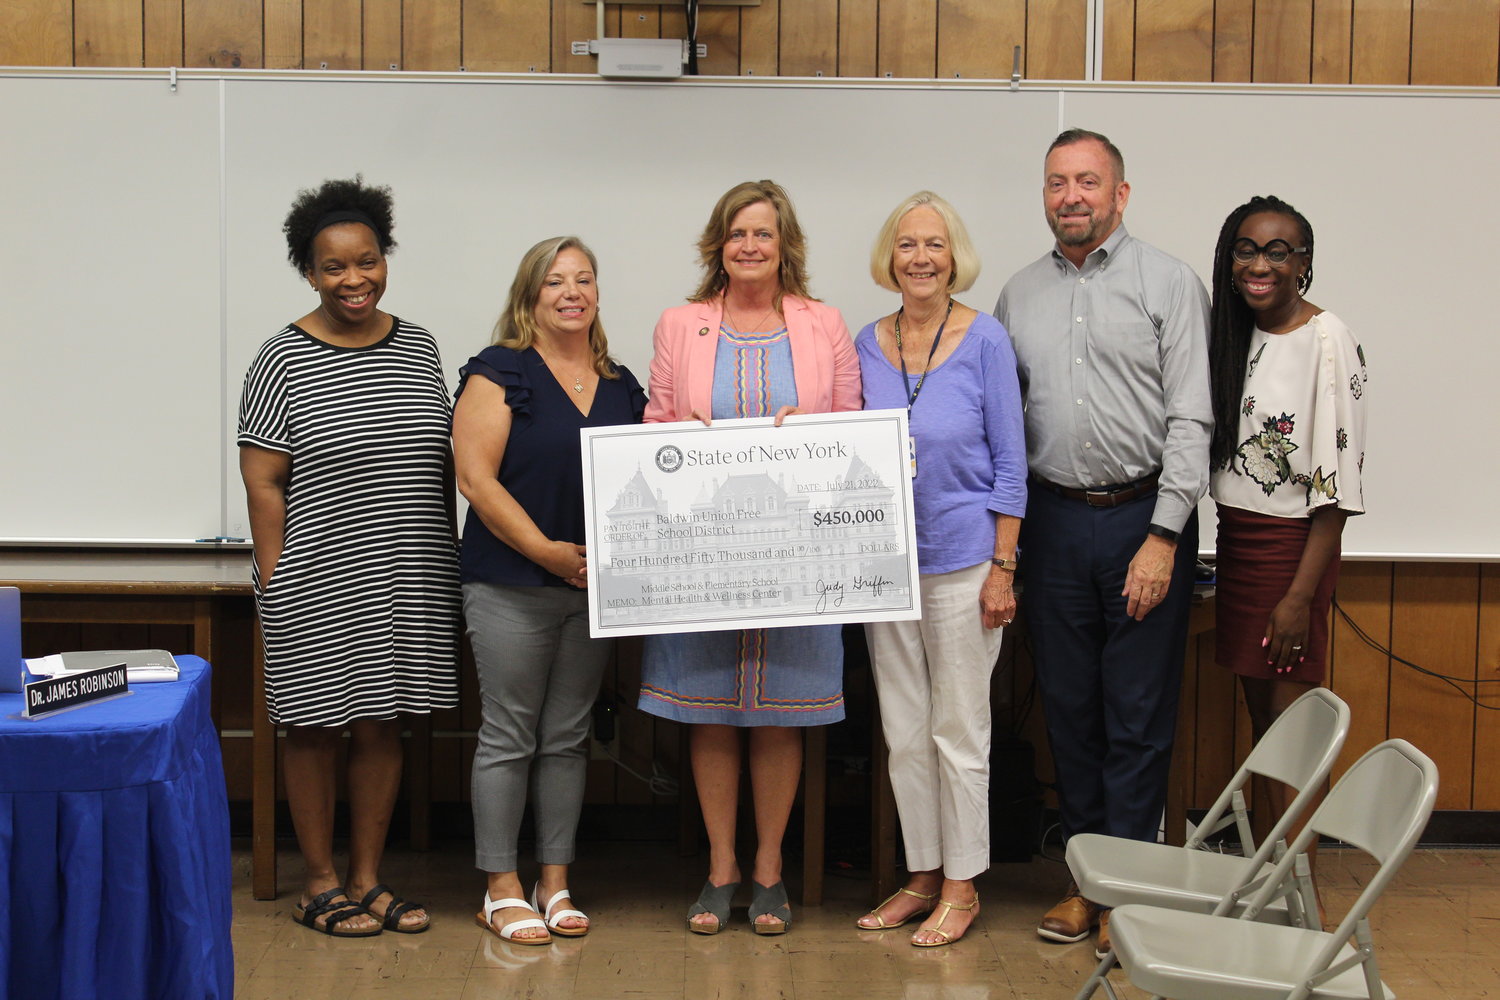 Trustee Karyn Reid, far left, education board president Susan Cools, Assemblywoman Judy Griffin, Trustee Mary Jo O’Hagan, board vice president Thomas Smyth and Trustee Annie Doresca accept the state check at the Aug. 10 meeting.